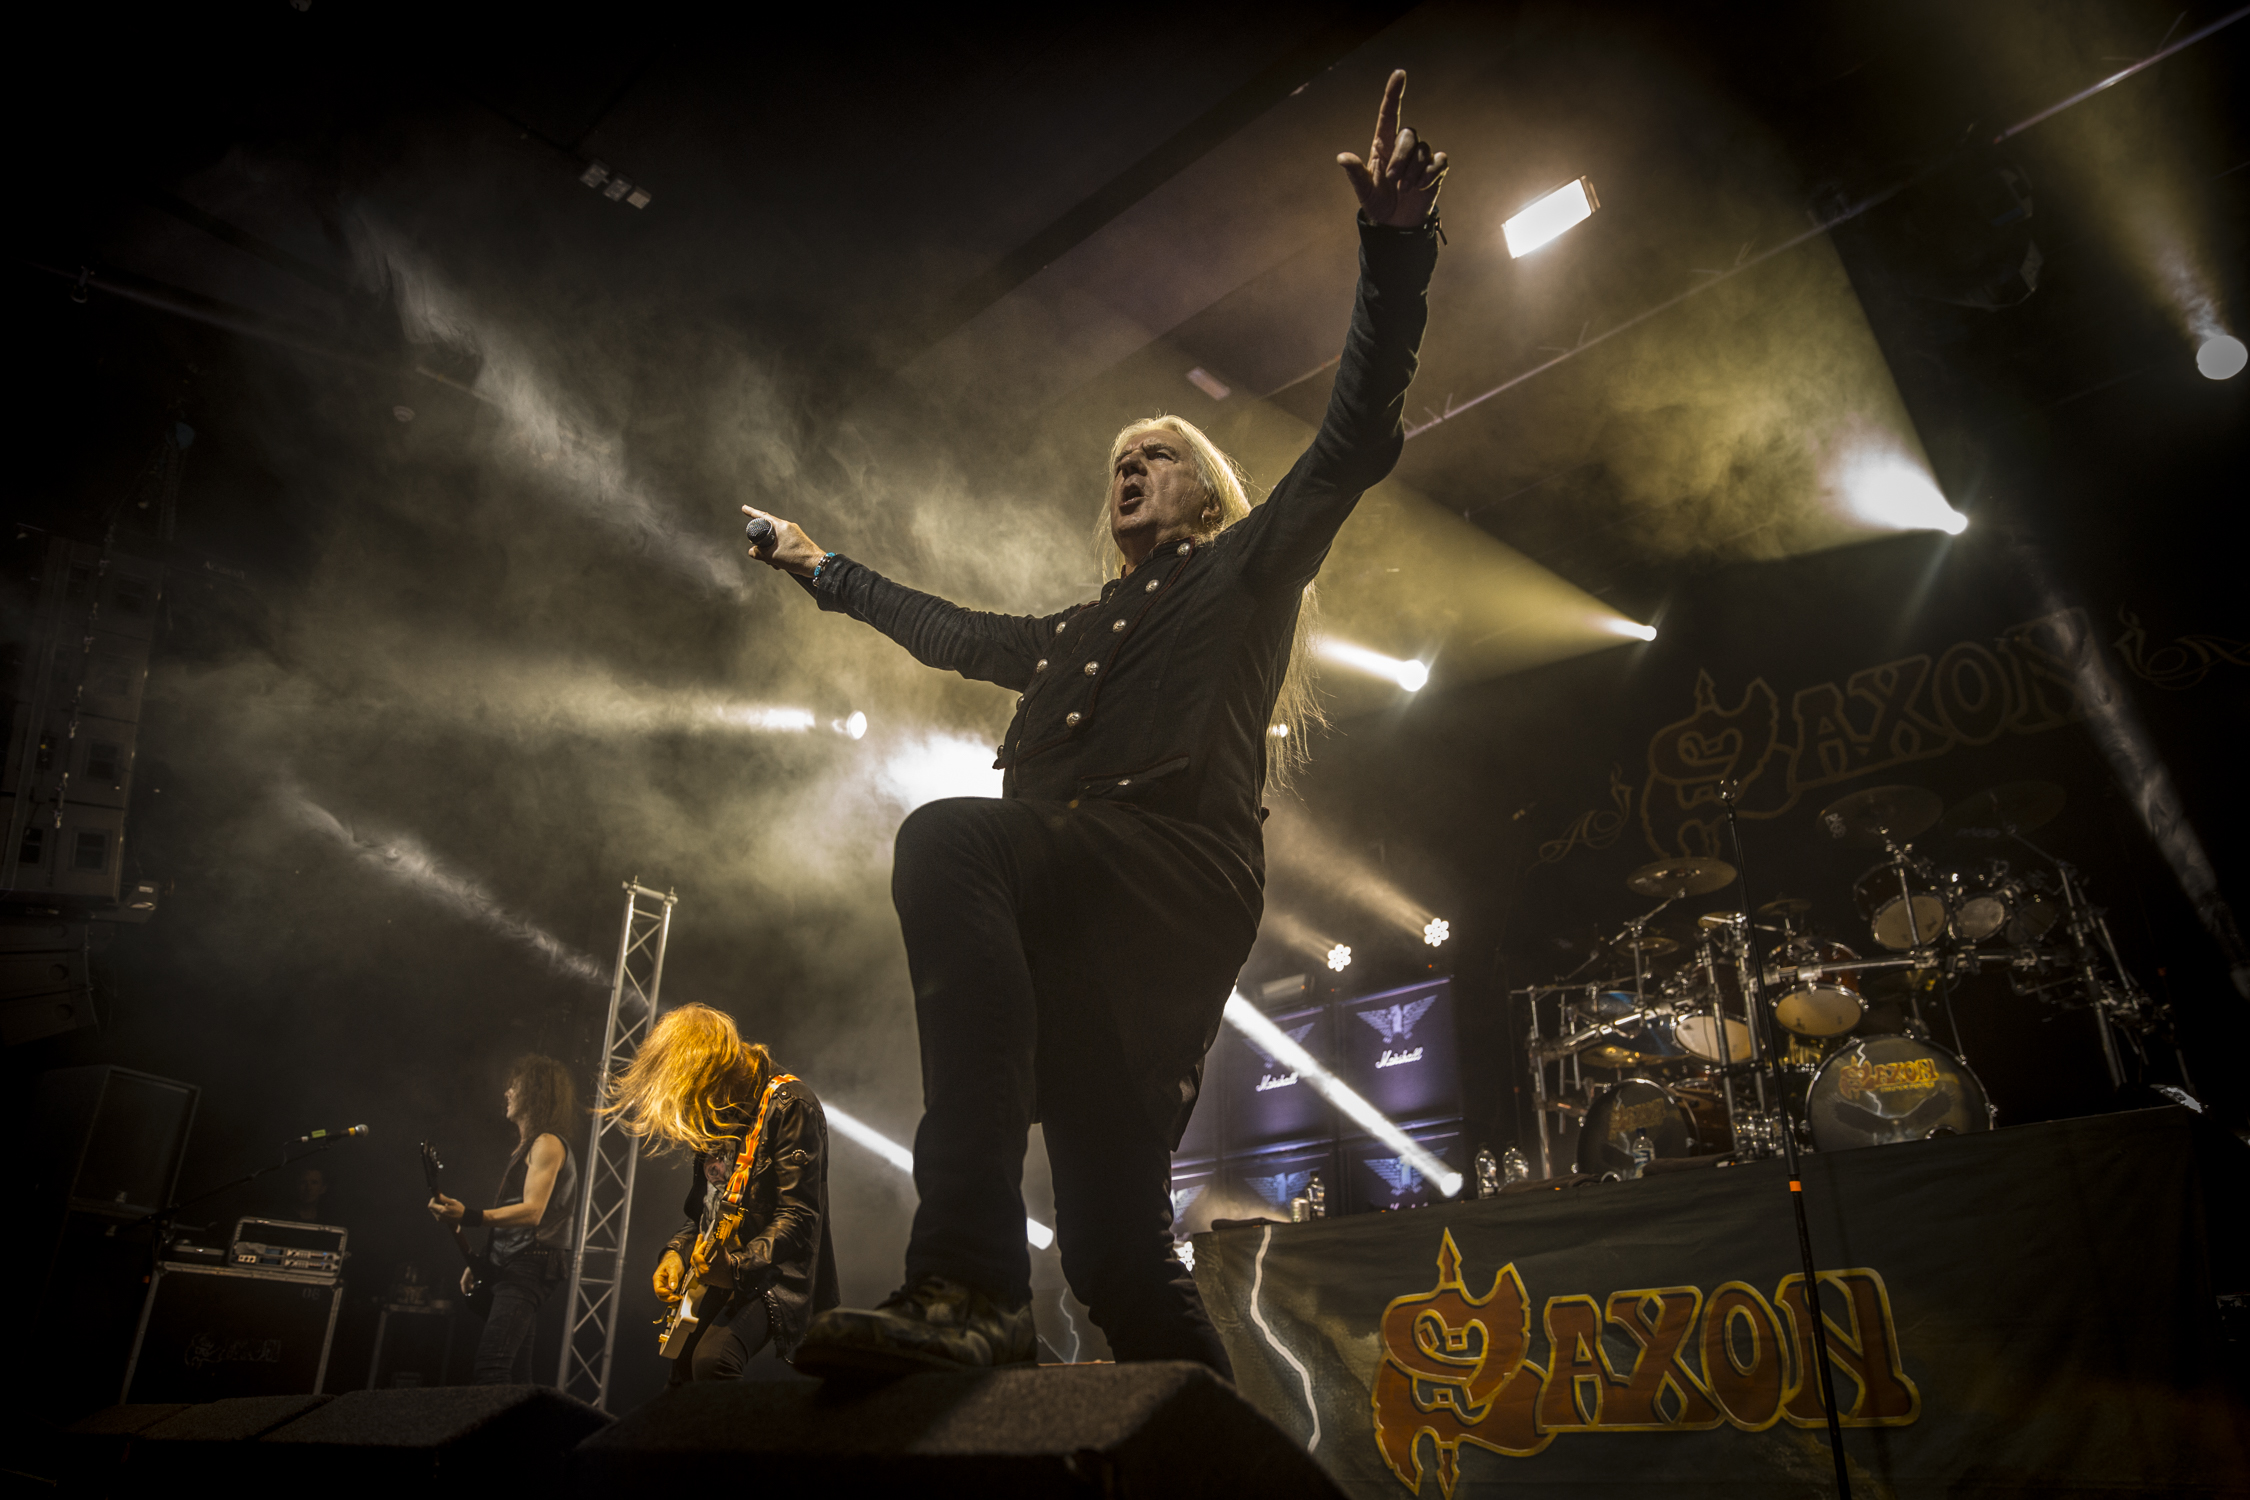  Saxon live at the Manchester Academy on October 21st 2018.  © Samantha Guess 